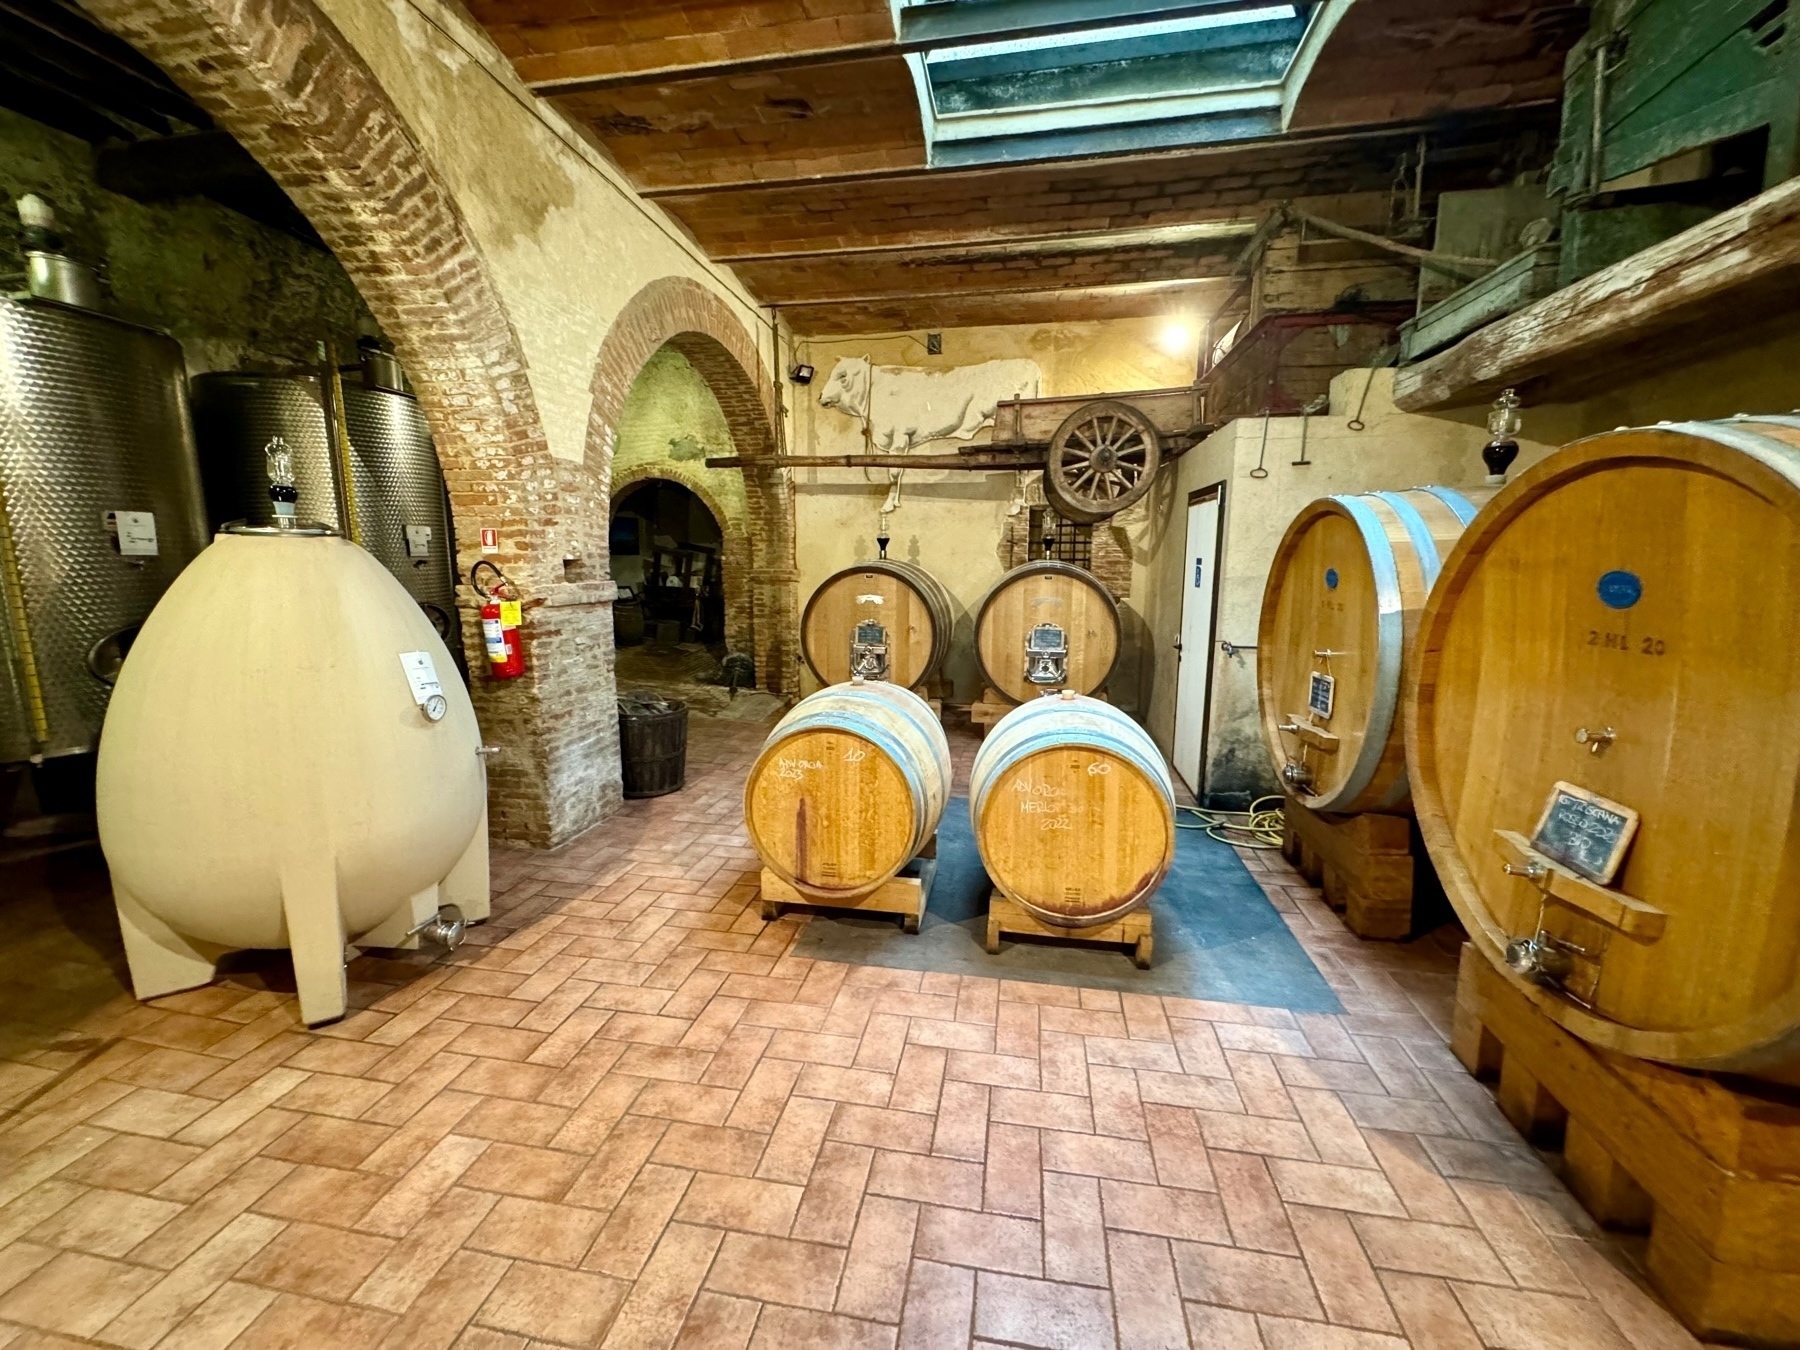 This image shows the interior of a winery cellar with various barrels and tanks used for storing and aging wine. There are large wooden barrels, a ceramic fermentation tank, and stainless steel vats. The space features brick arches, rustic decorations, and industrial elements. 